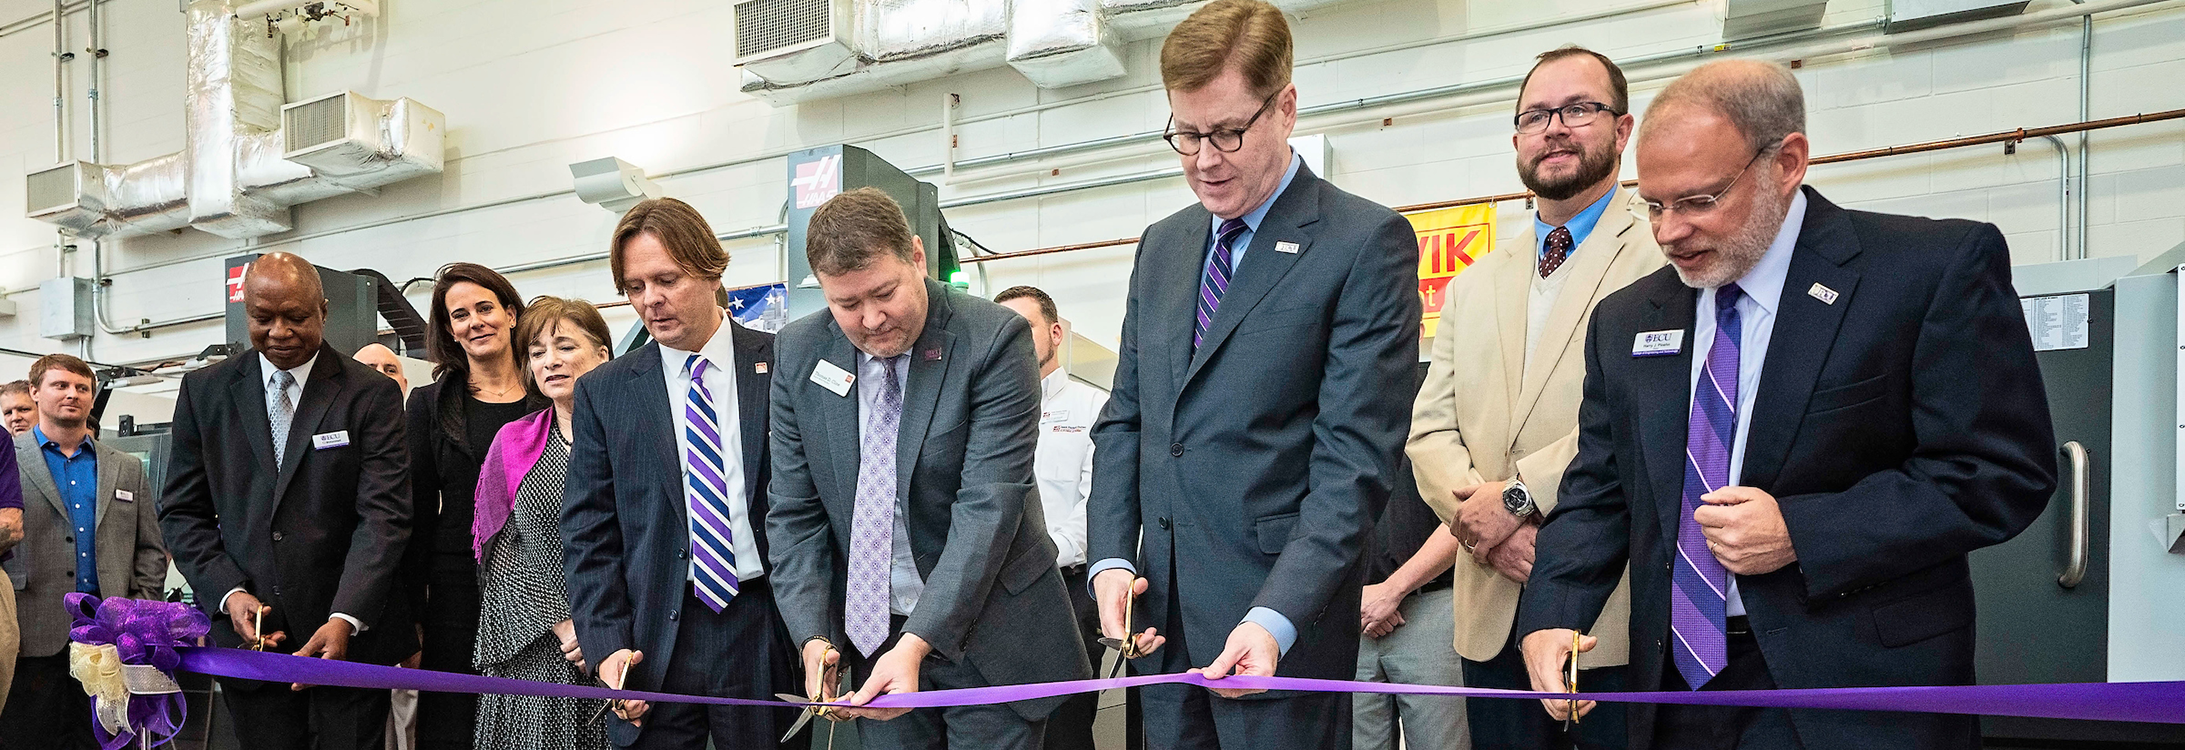 ECU and Wells Fargo officials cut the ribbon on four new CNC machines funded in part by the Wells Fargo Foundation. (Photo by Cliff Hollis) 